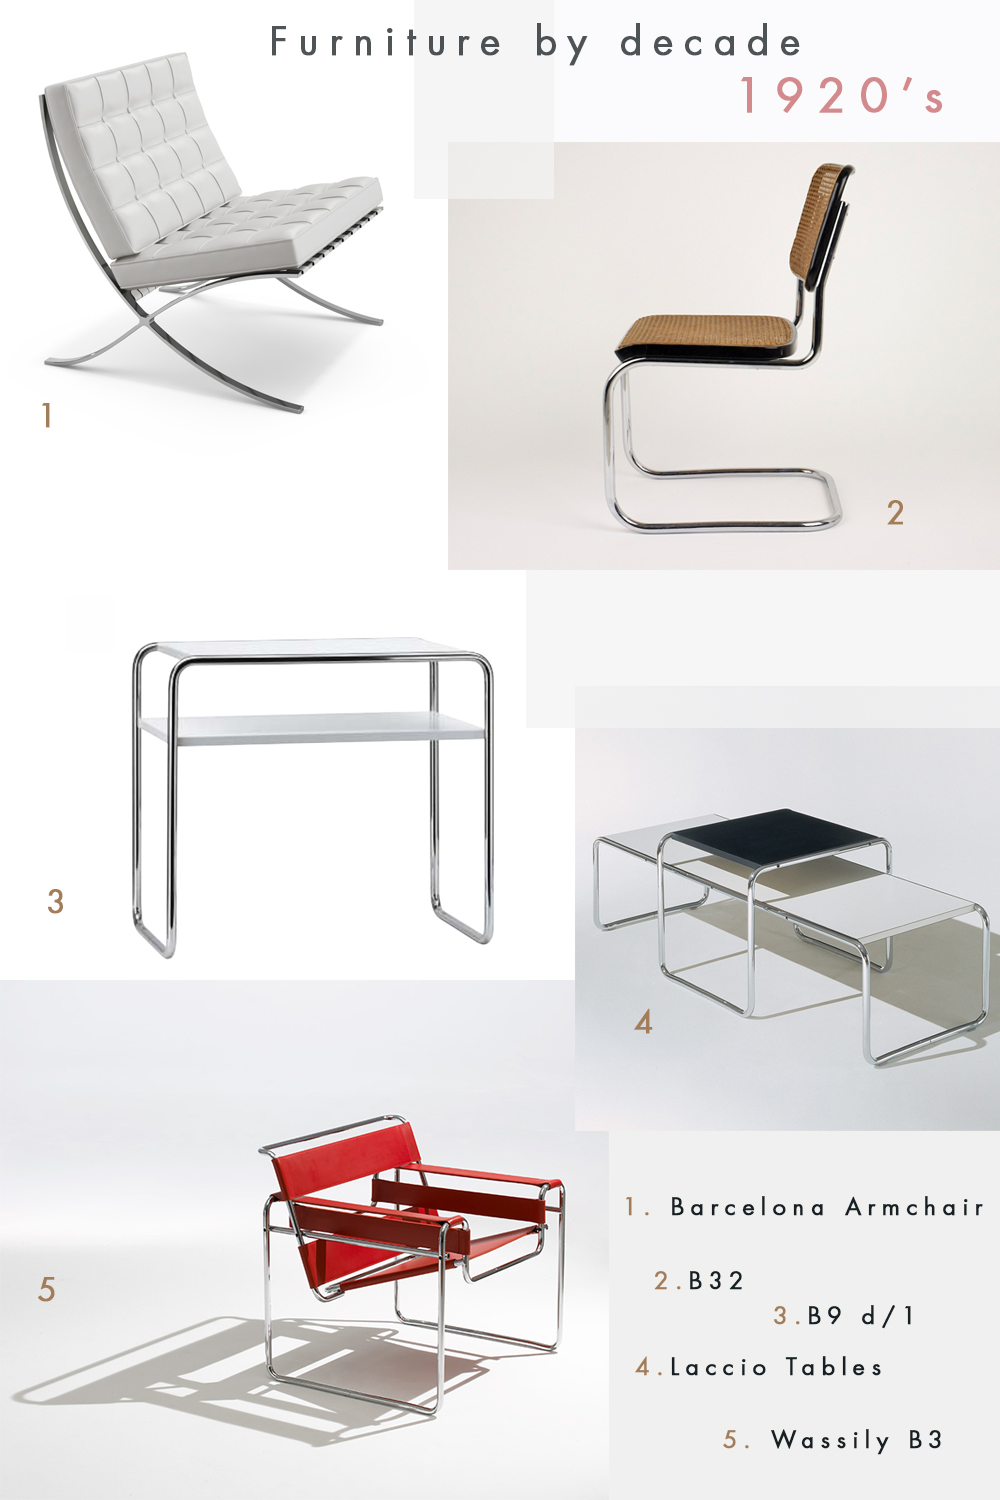 Furniture-by-decade